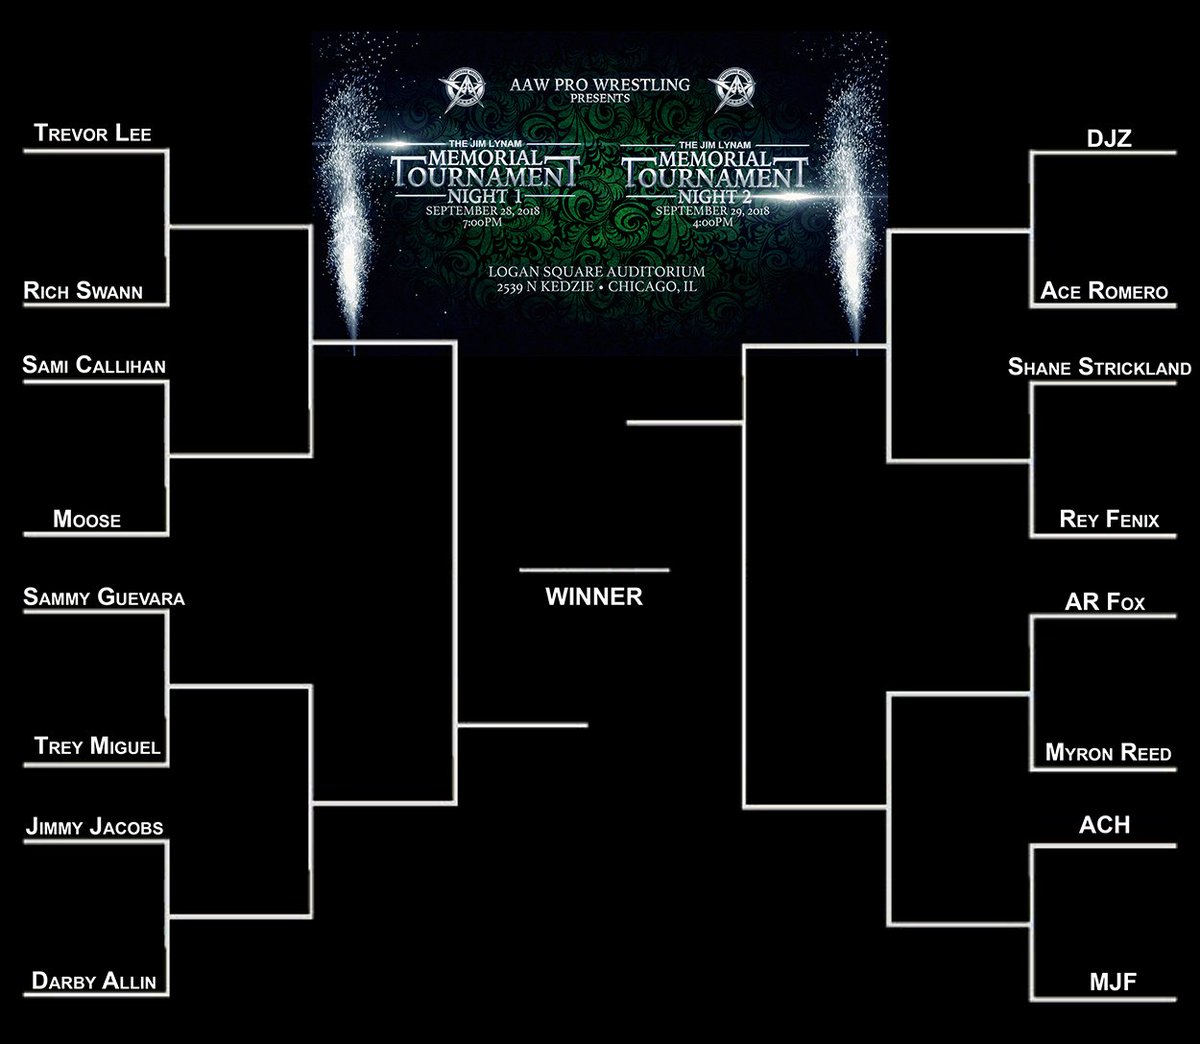 Here are the official brackets for the Jim Lynam Memorial Tournament this Friday and Saturday at the Logan Square Auditorium in Chicago. Get your tickets now at aawpro.ticketleap.com #AAWLynam